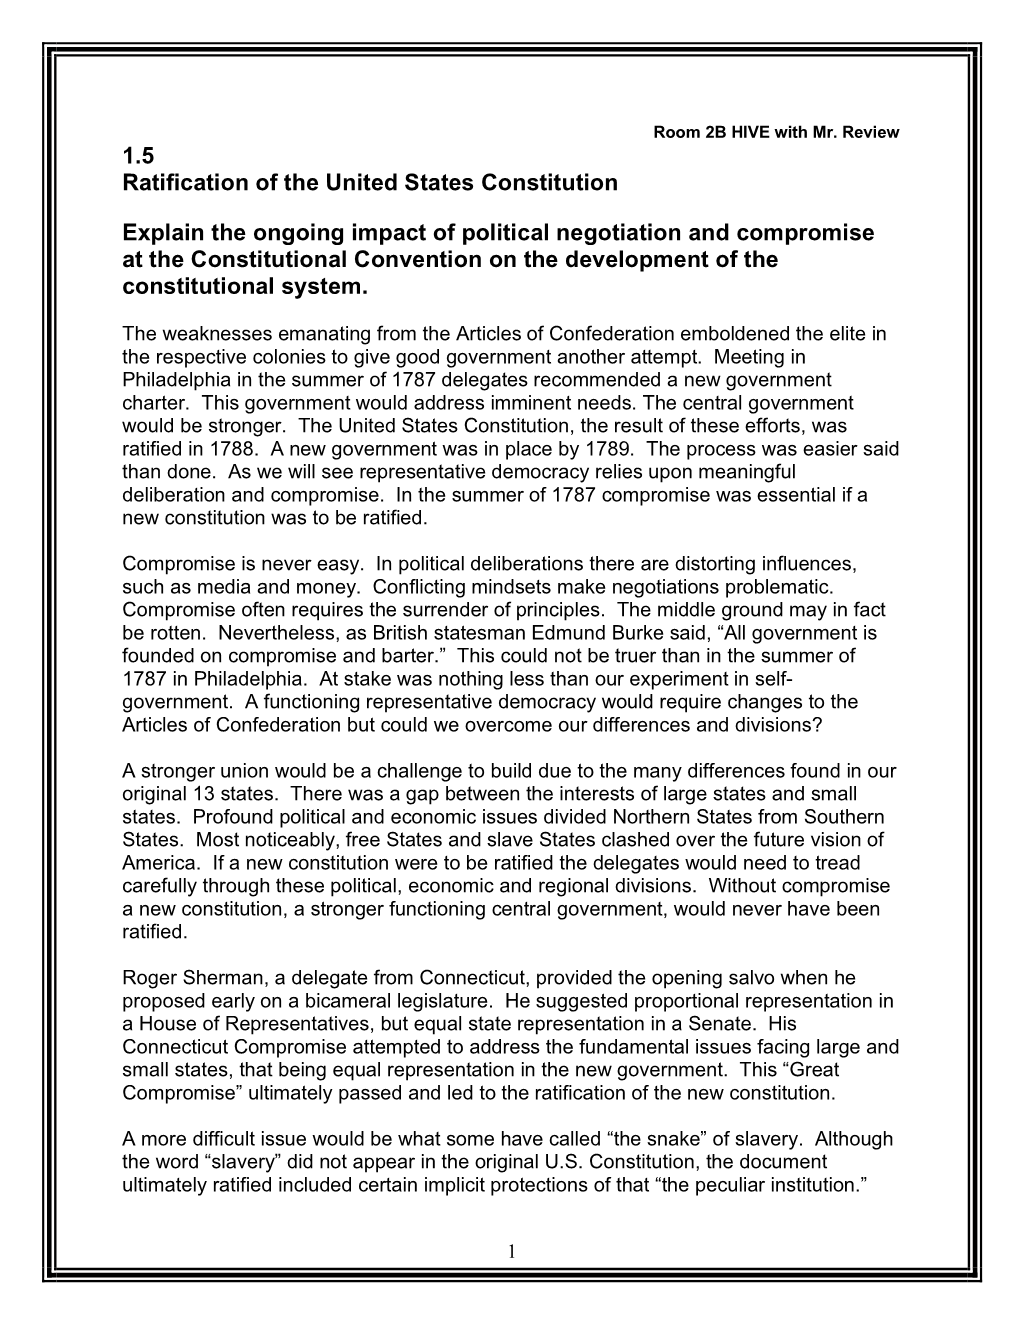 1.5 Ratification of the United States Constitution Explain the Ongoing